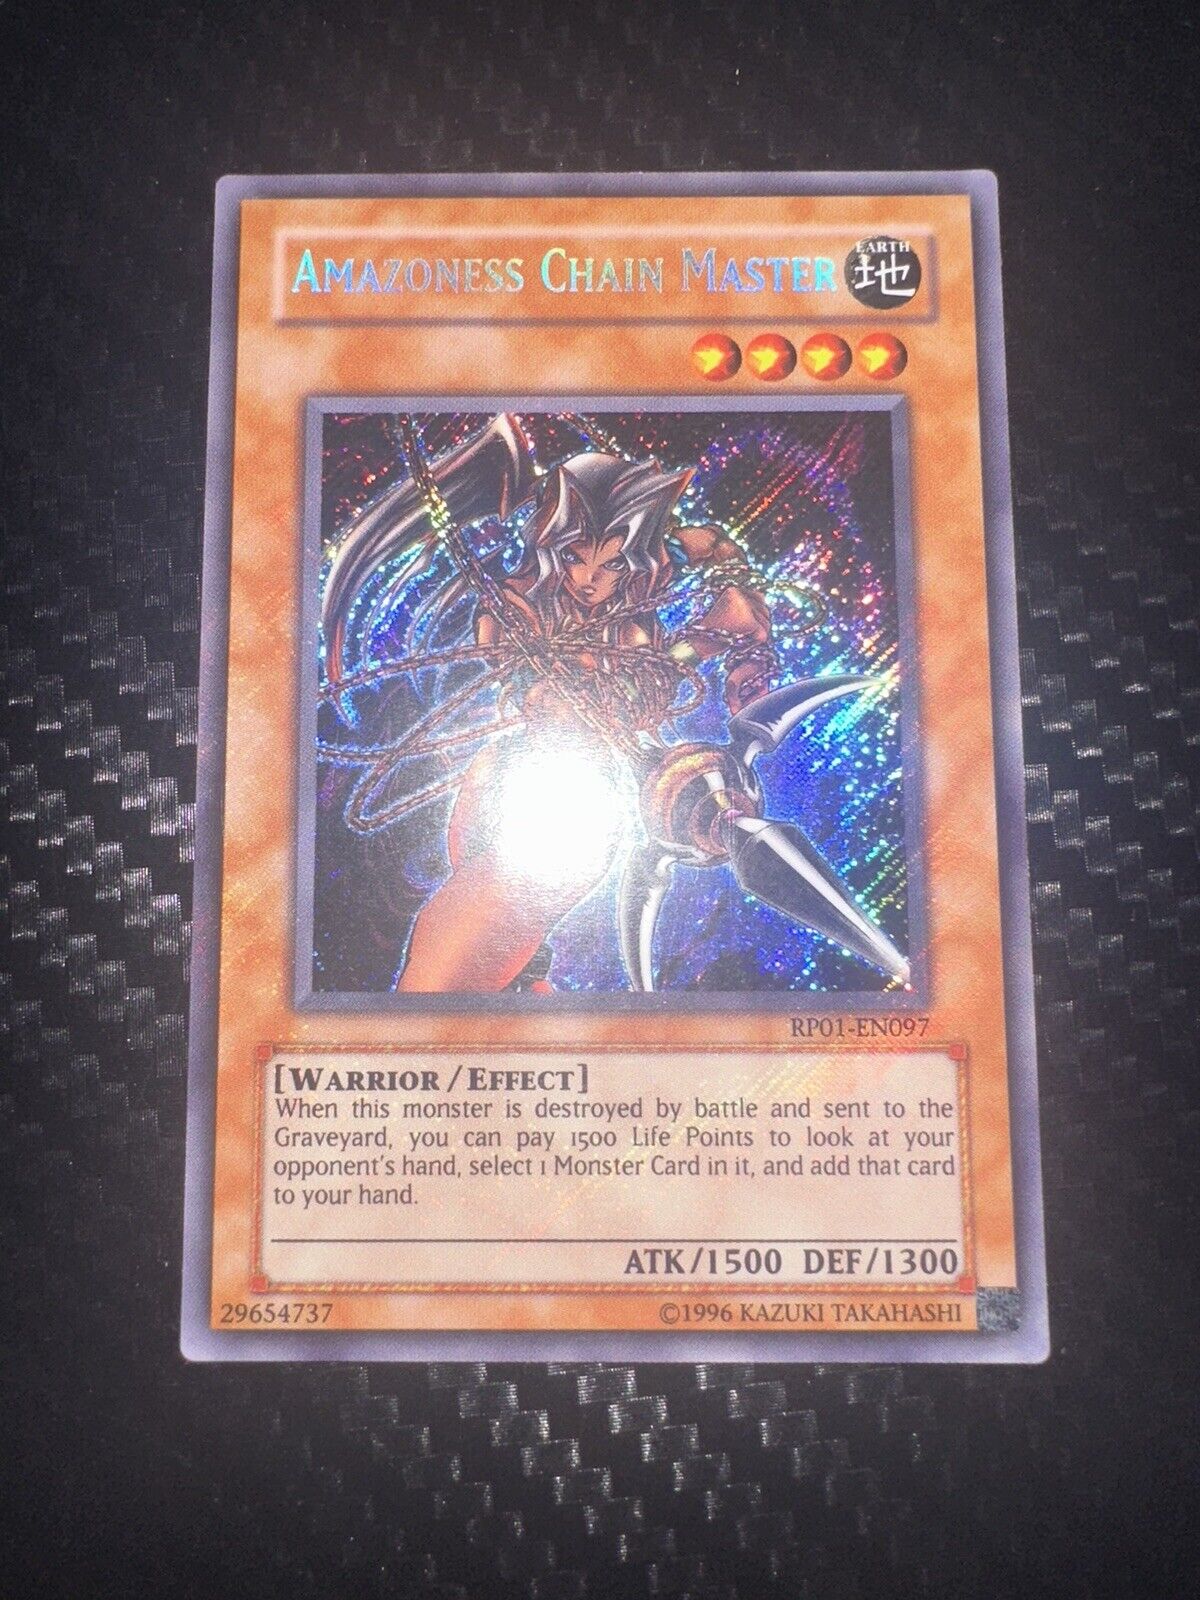 Yu-Gi-Oh Amazoness Chain Master Retro RP01-EN097 | Secret | Very Hard To Find